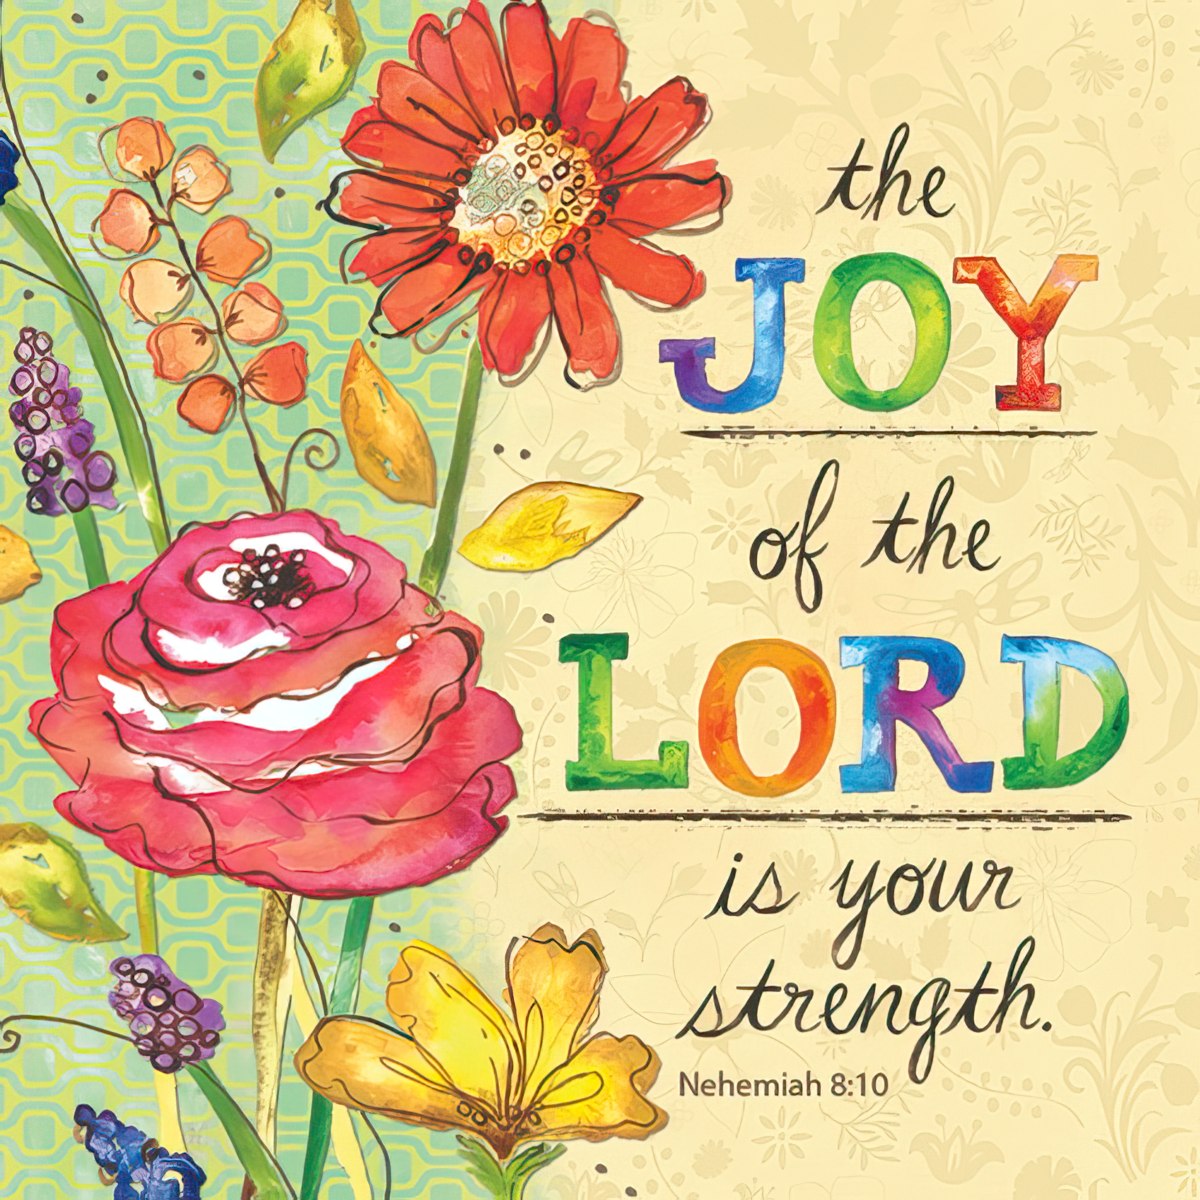 The joy of the Lord is your strength.